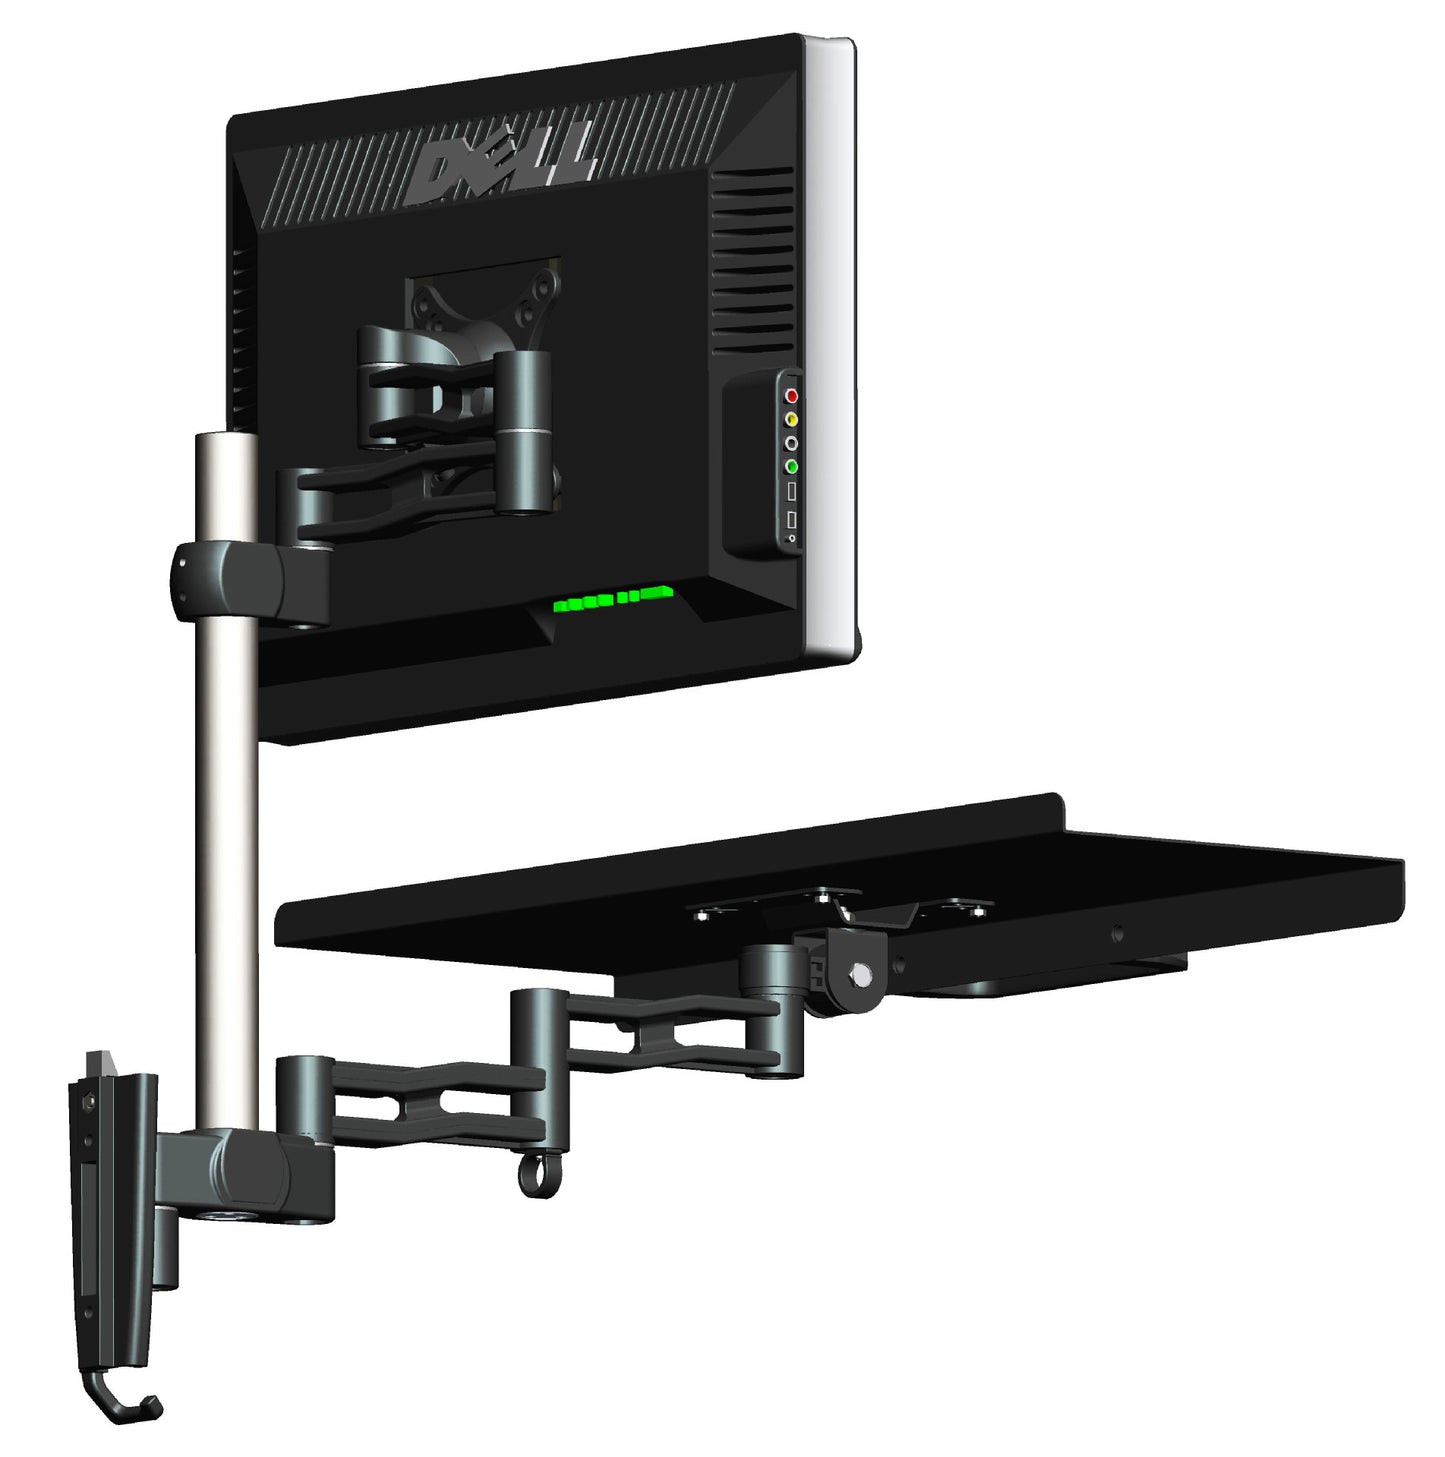 Black Sit-Stand Wall Mount Counterbalance Height Adjustable Monitor and Keyboard Workstation for Screens up to 27 inches